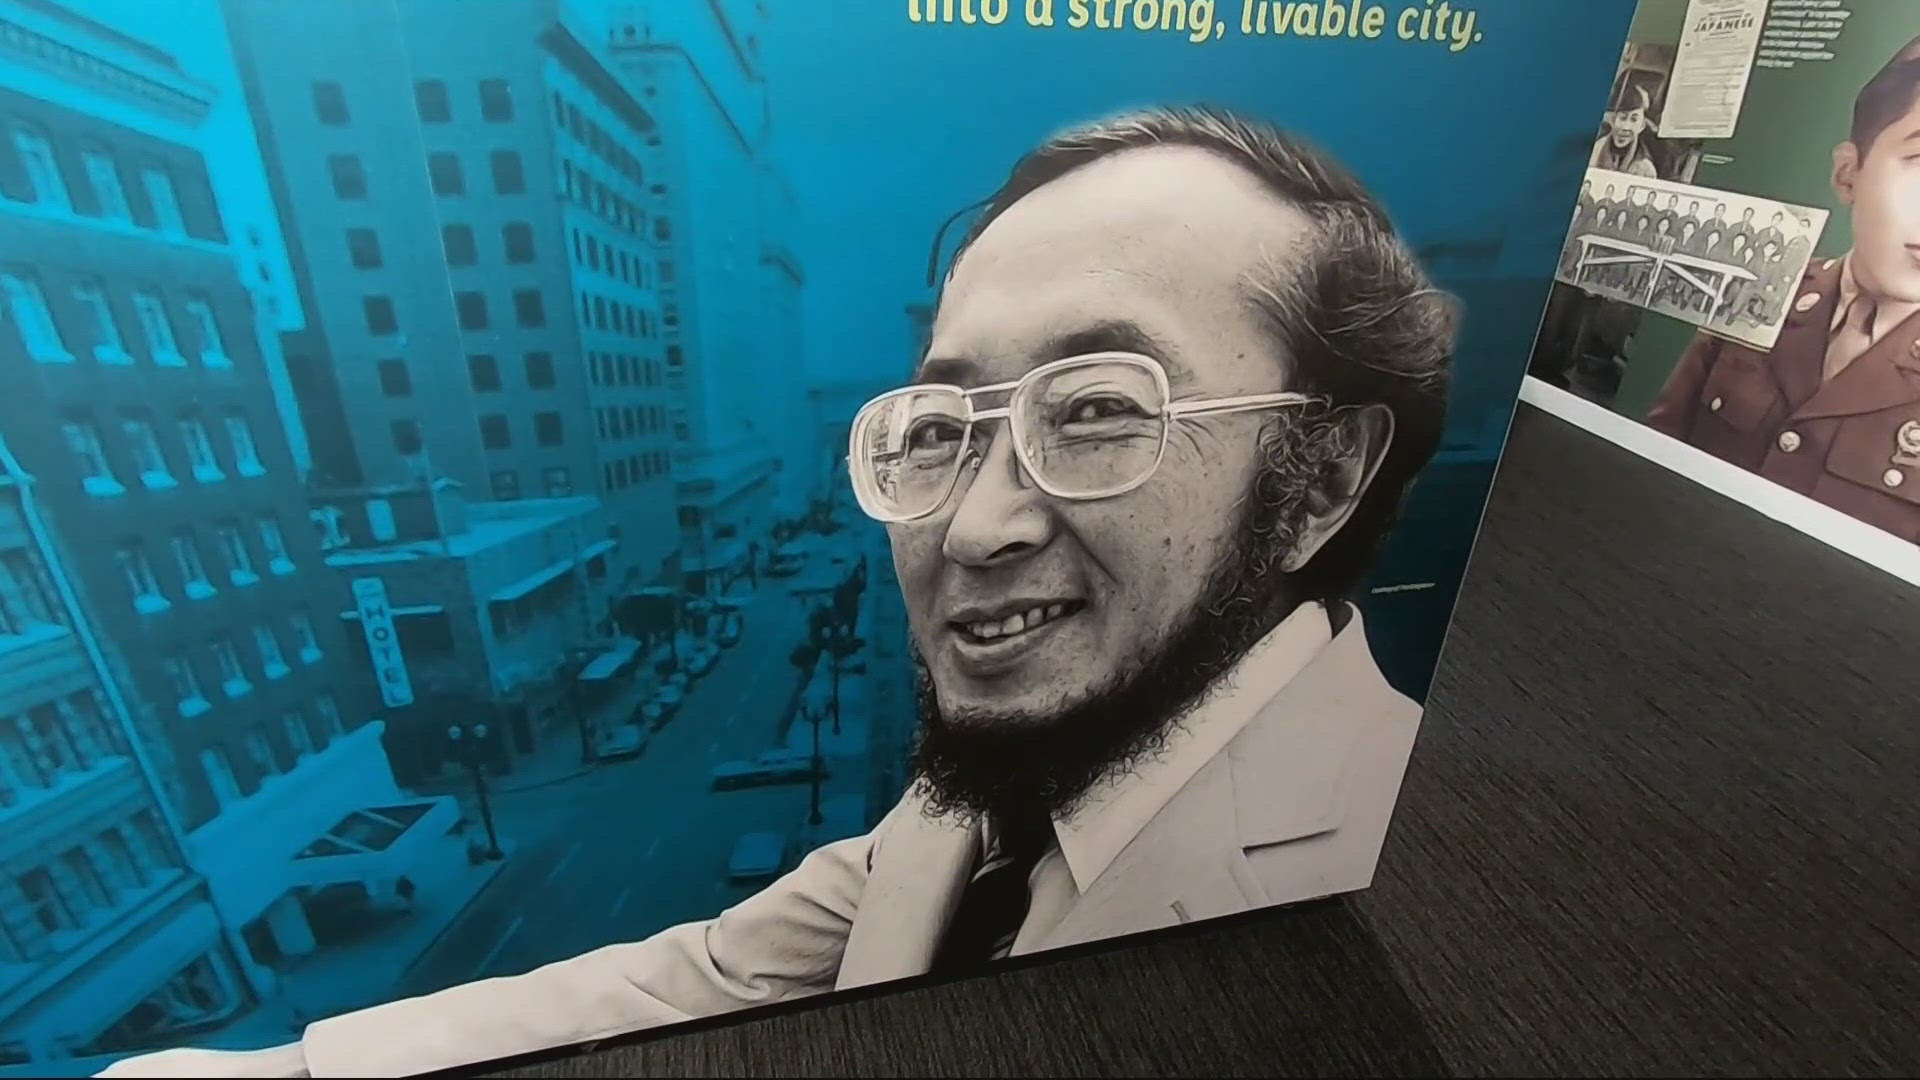 Bill Naito was a successful businessman and civic leader. He invested in many of Portland's landmarks, including Pioneer Square and the iconic white stag sign.